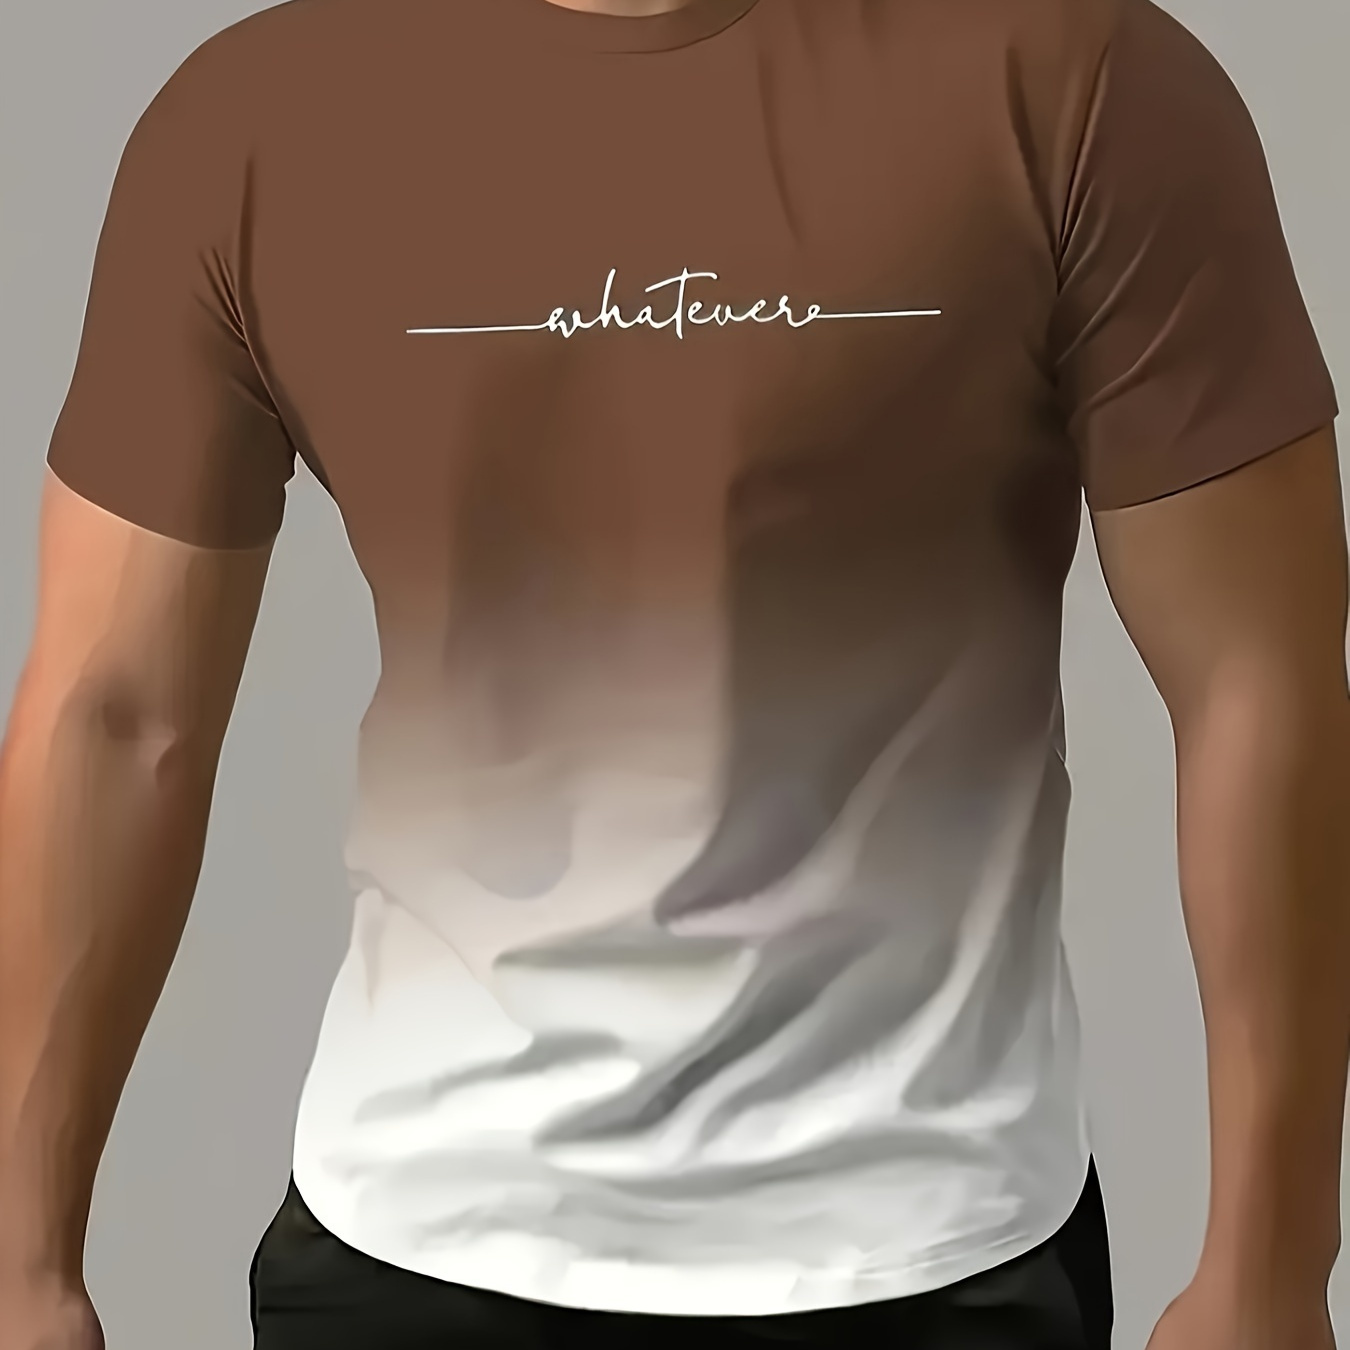 

Classic Design Gradient Color And Letter Print "whatever" Crew Neck And Short Sleeve T-shirt, Casual And Chic Tops For Men's Summer Outdoors Wear